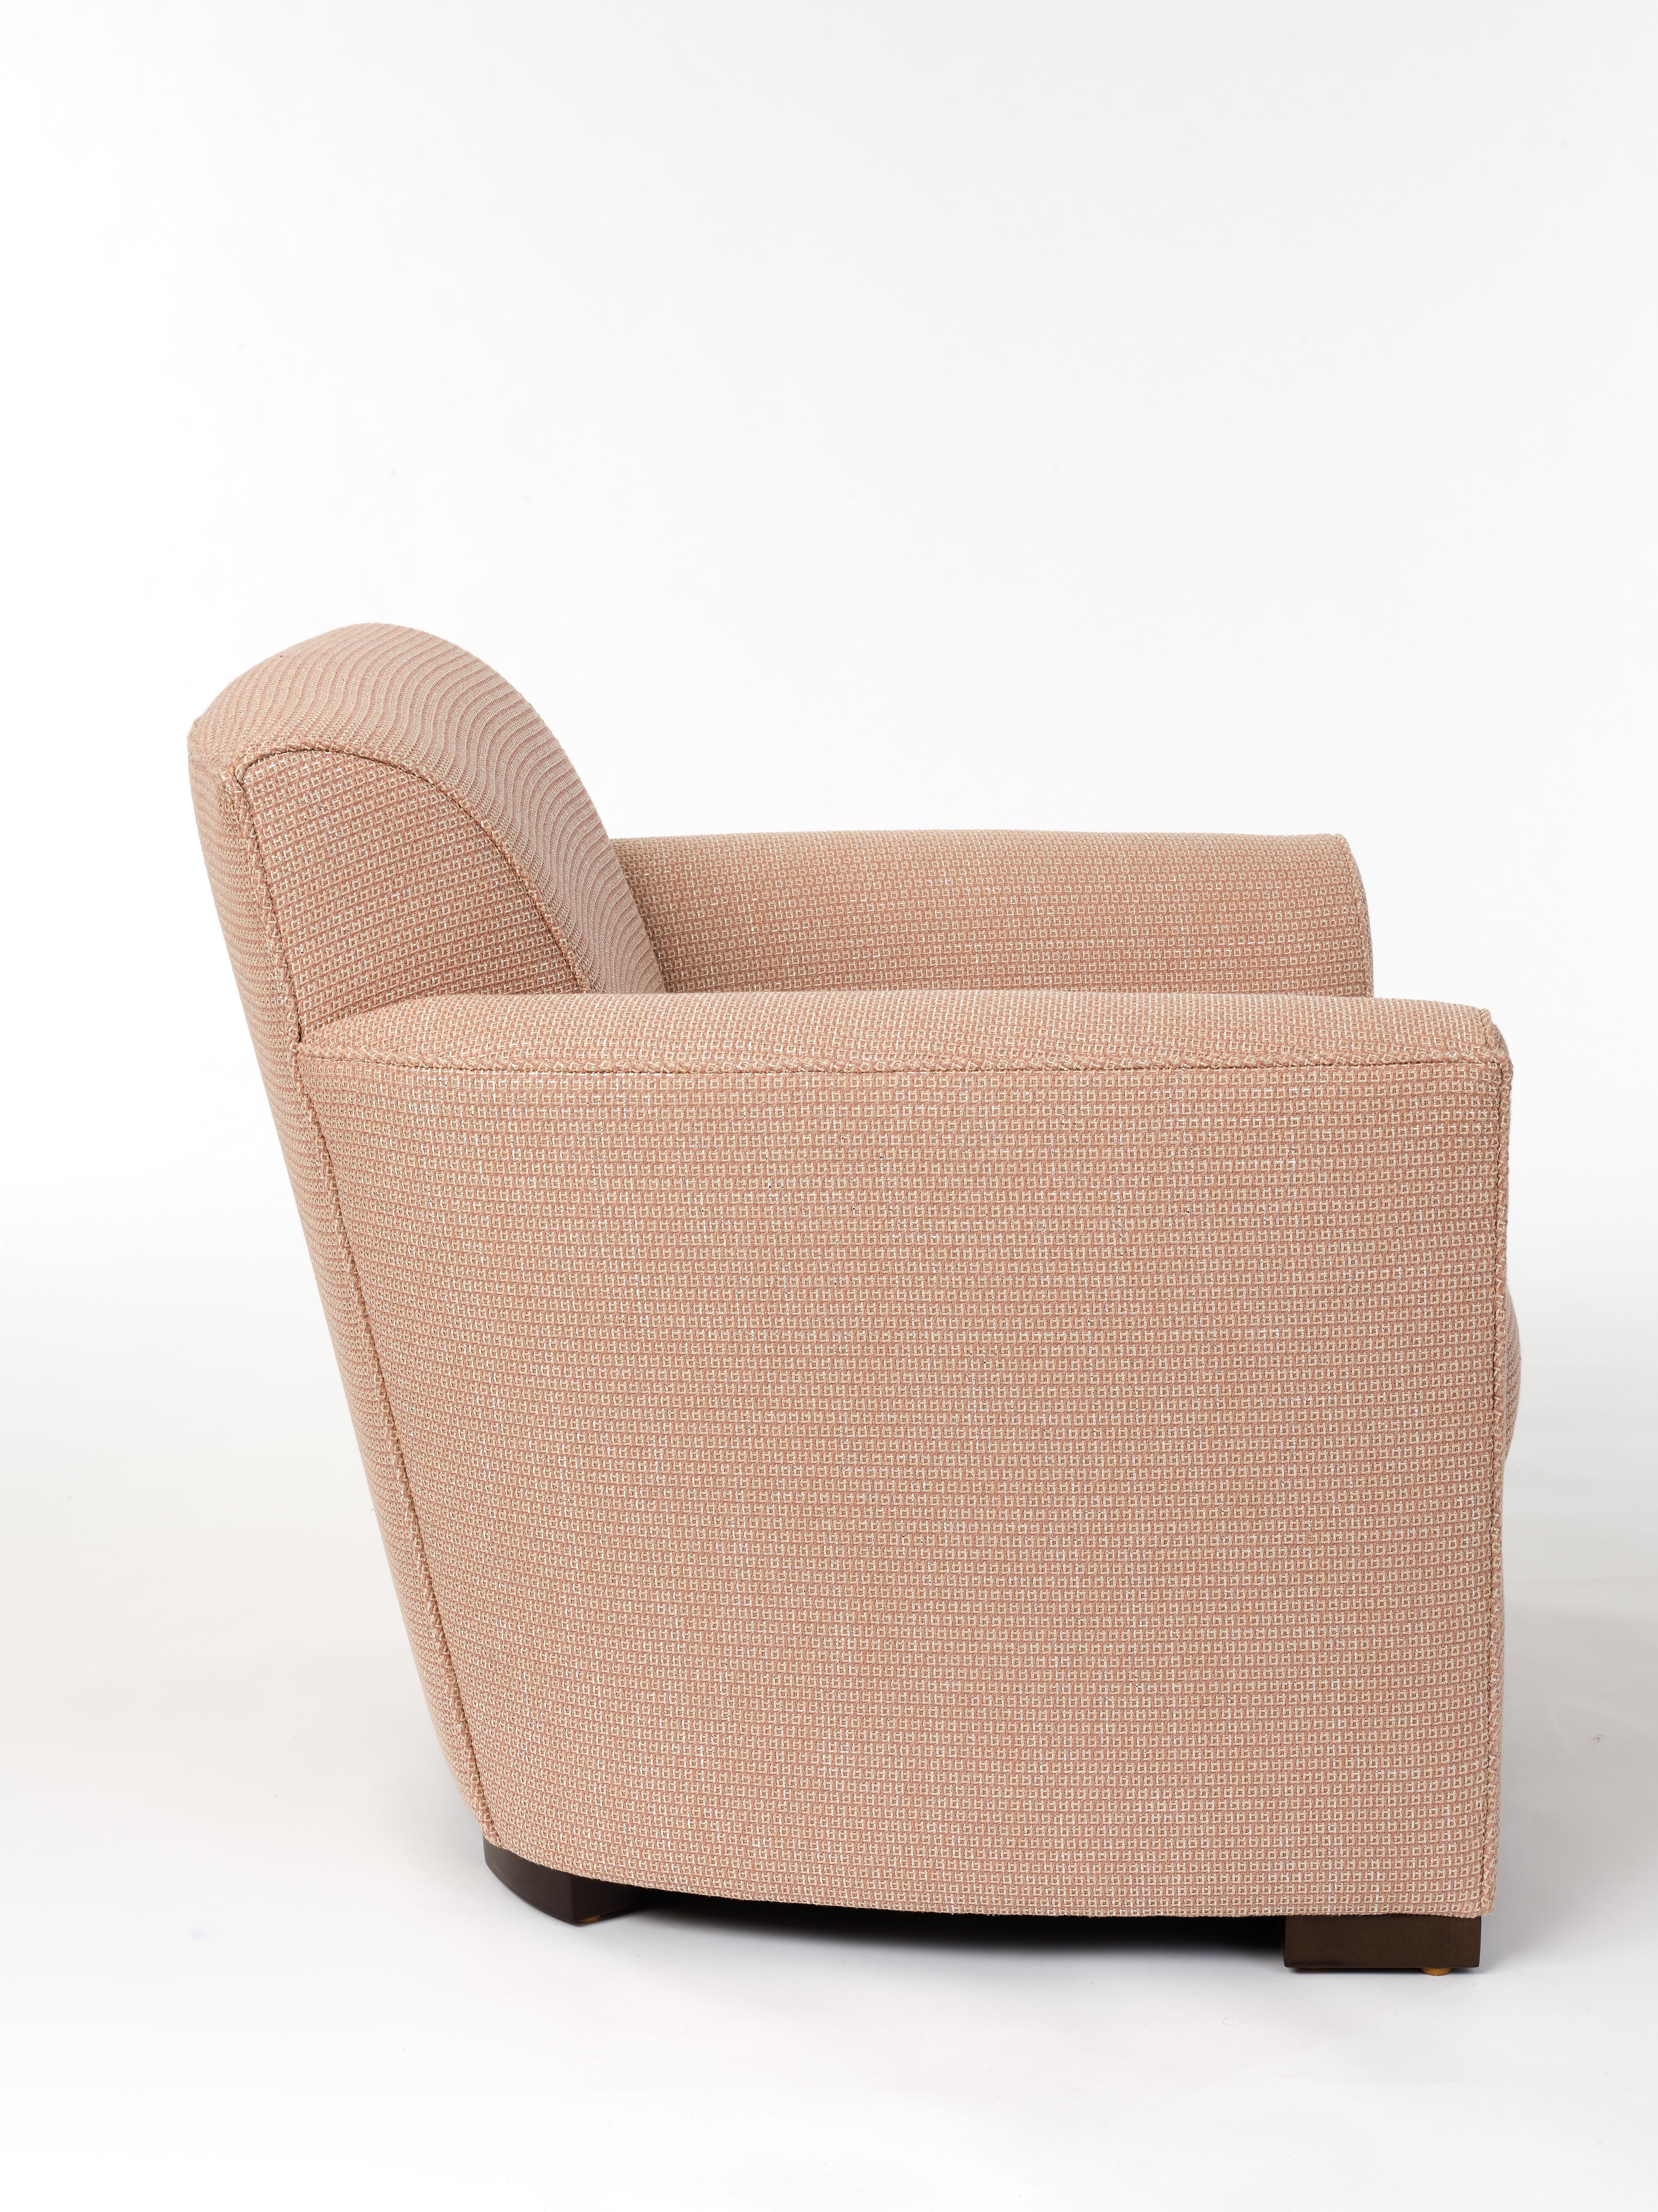 Modern Donghia Noble Chair in Blush Pink Cotton Upholstery with Geometric Pattern For Sale